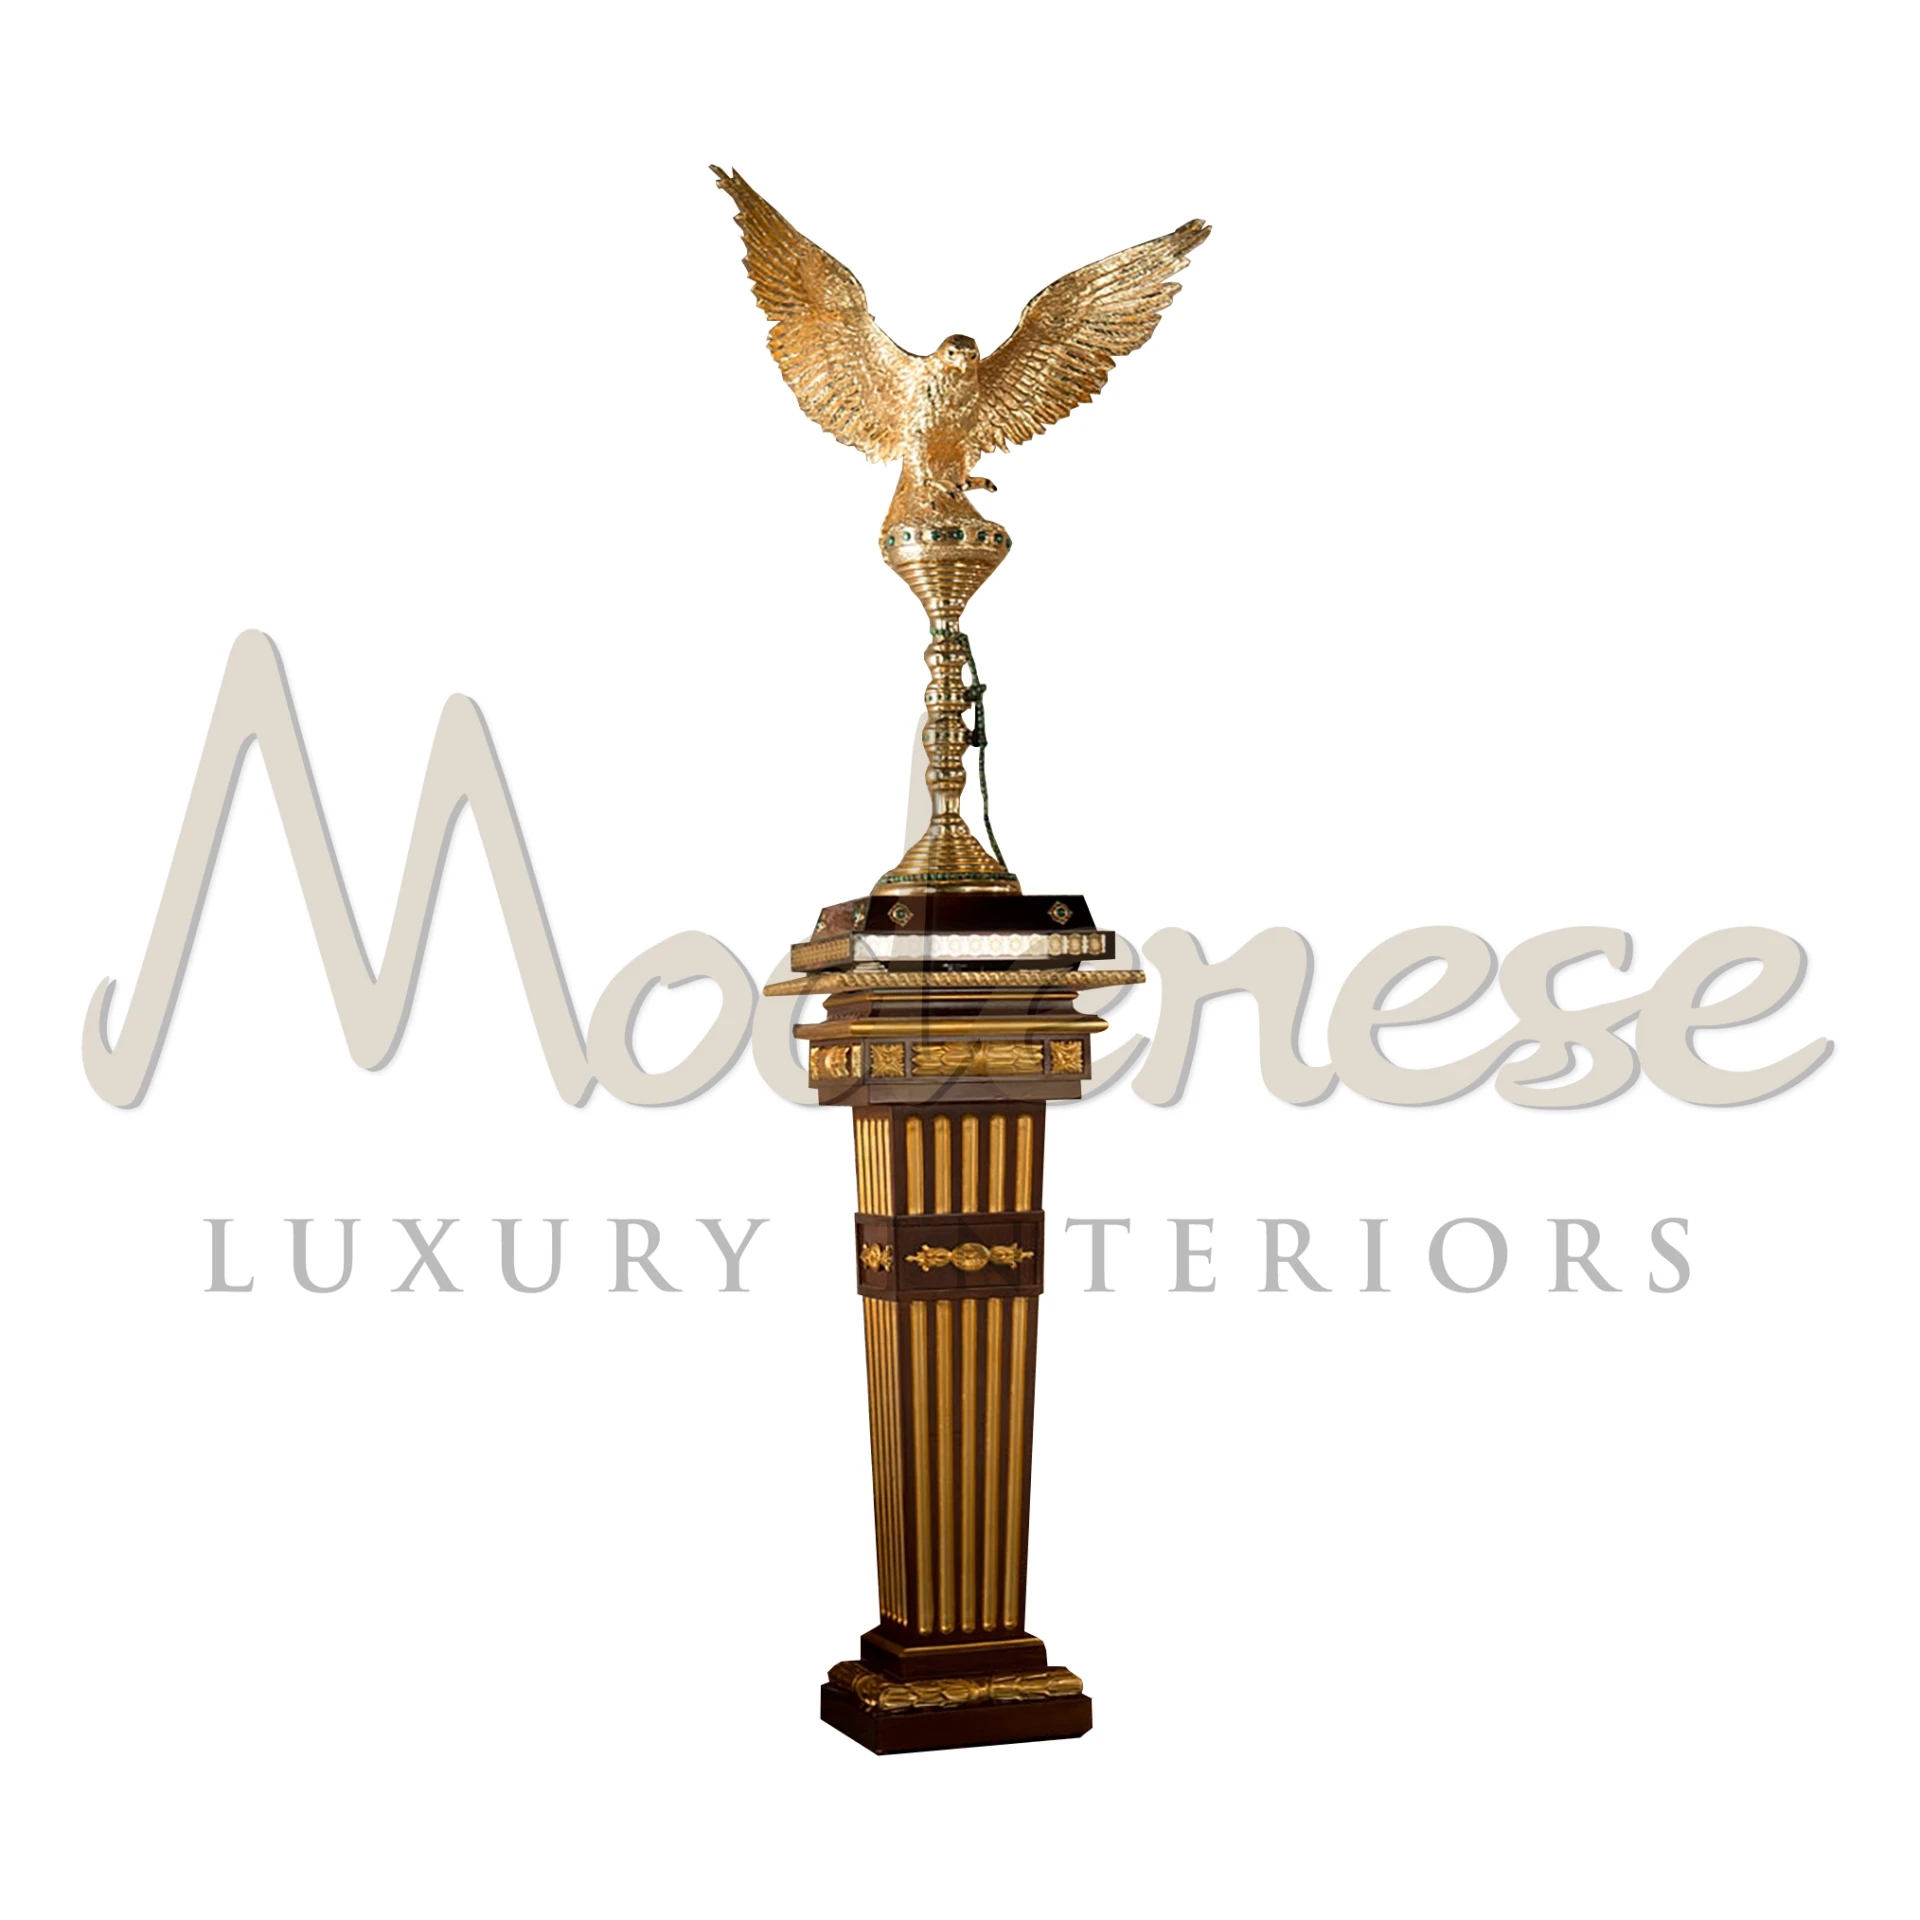 Luxury Italian Column Vase Stand by Modenese with Elegant Contours